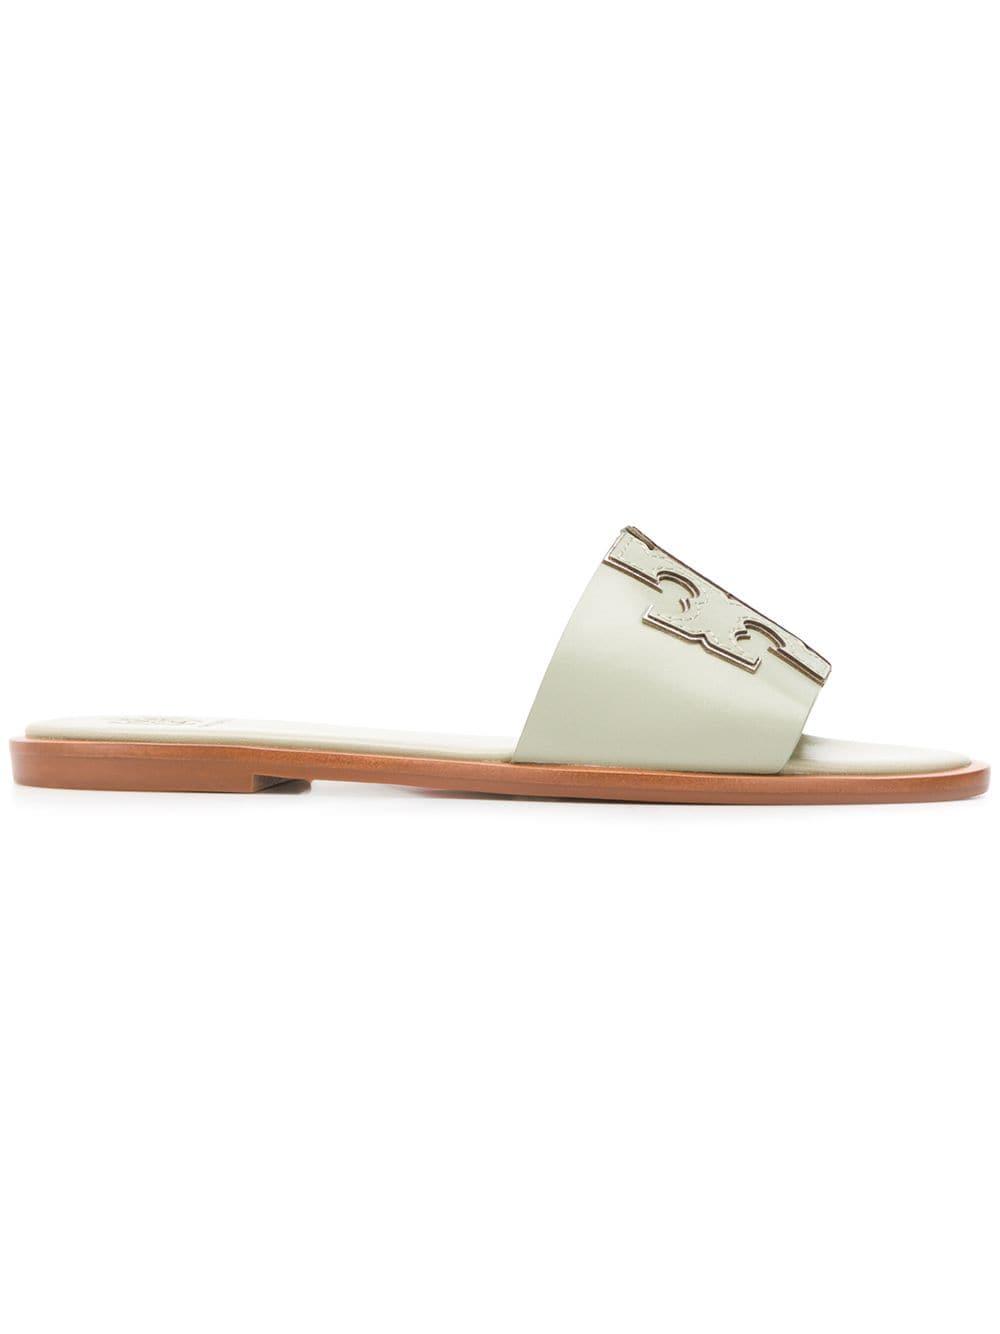 Tory Burch Leather Ines Slides in Green - Lyst